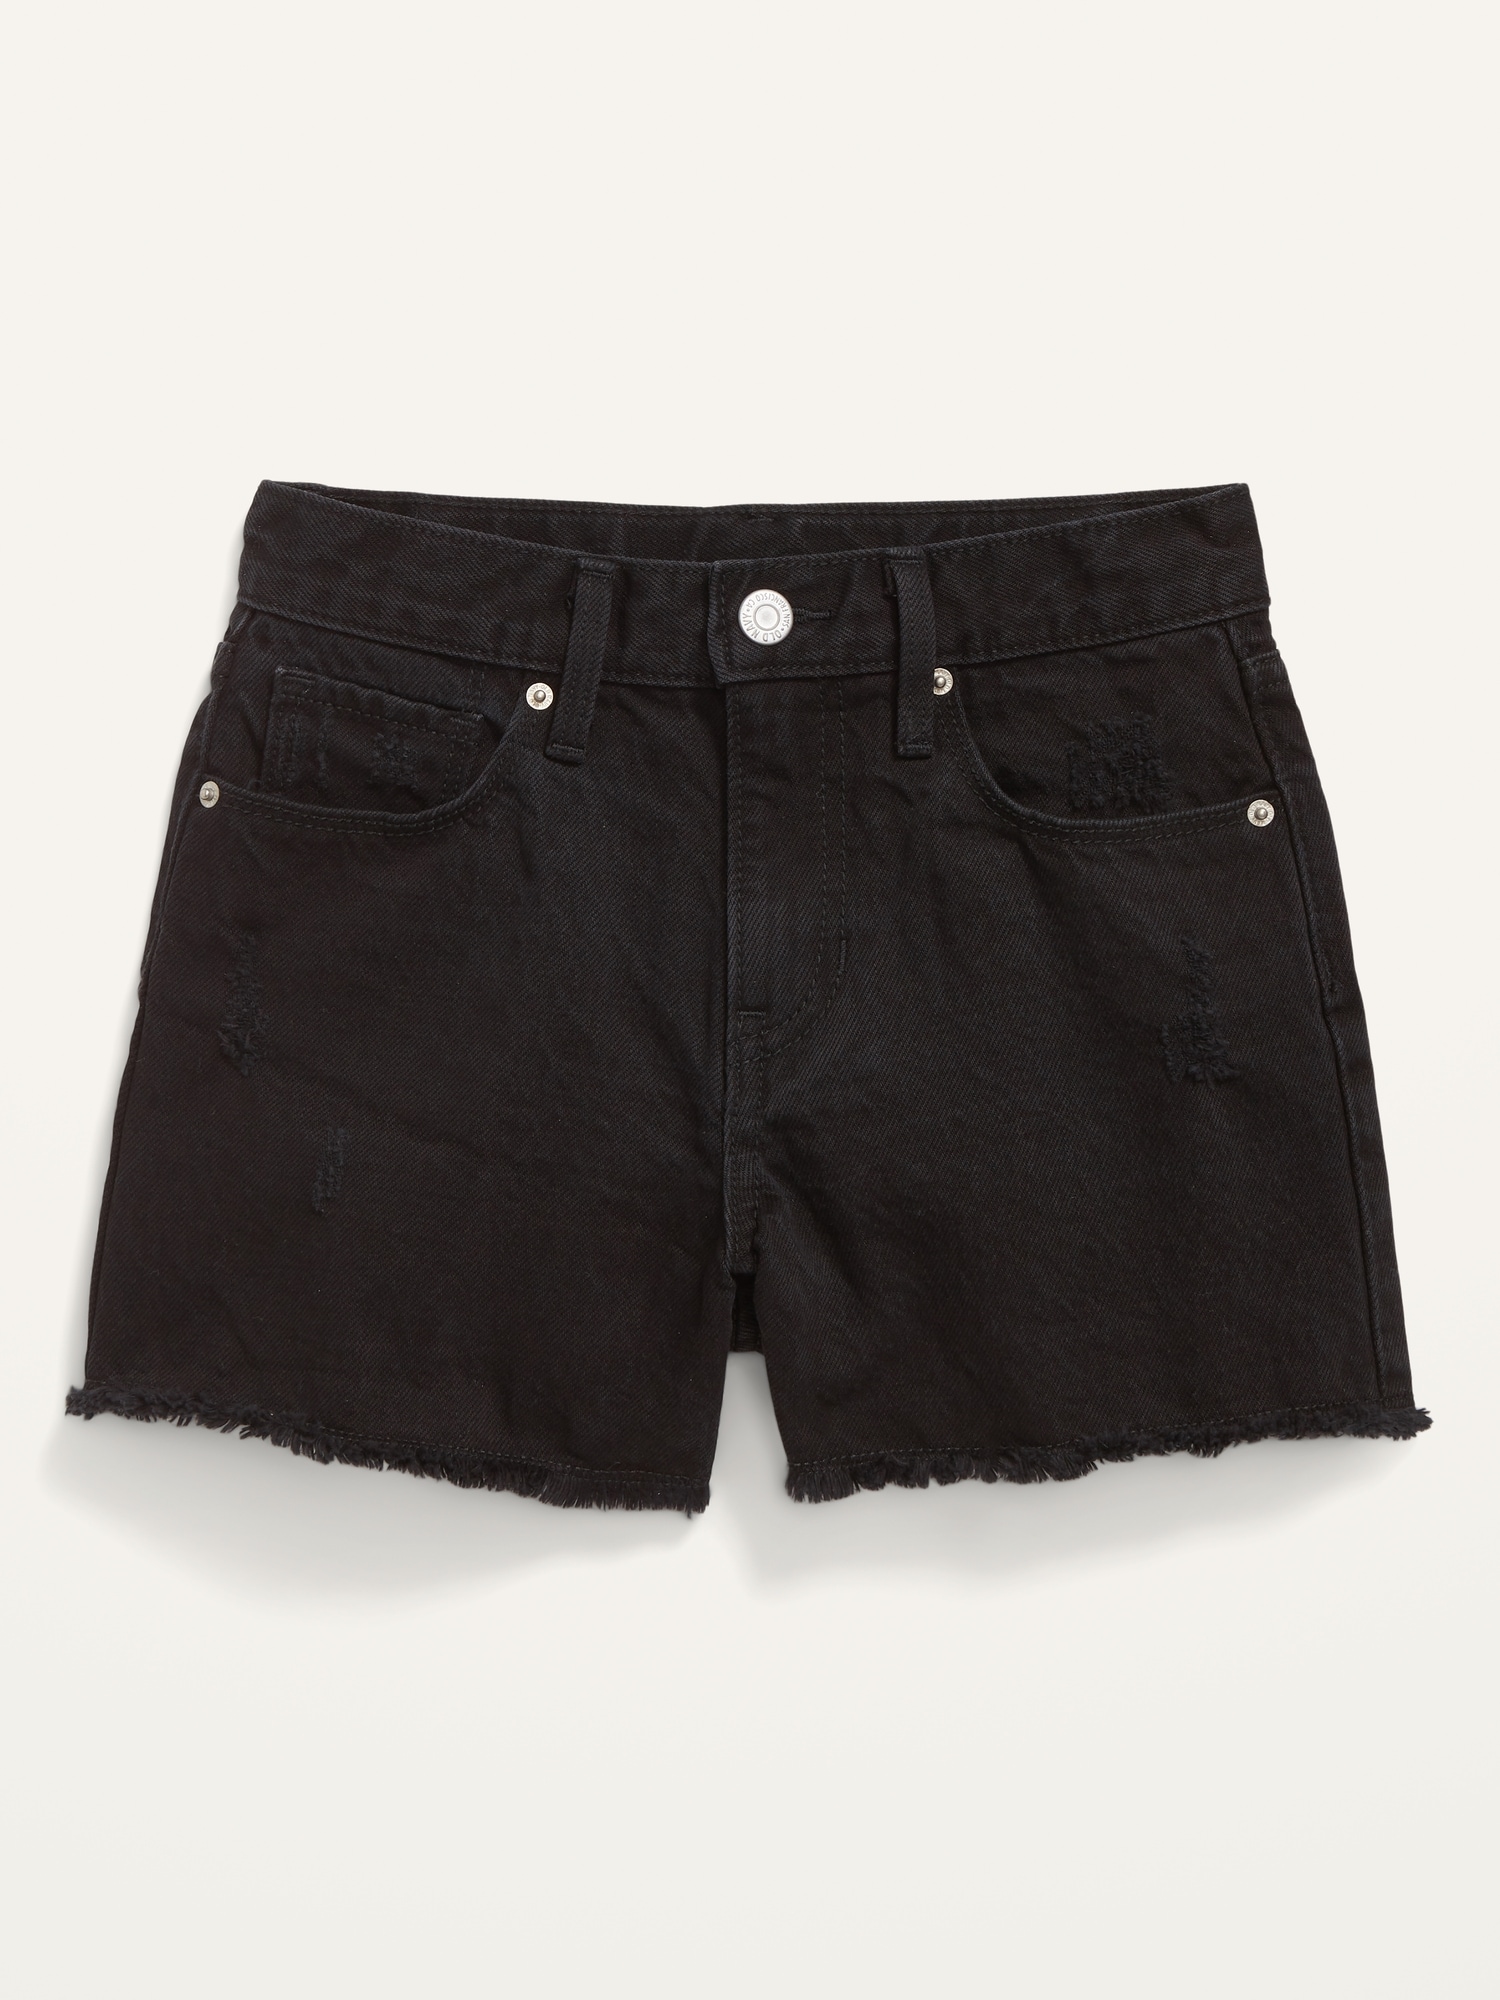 Extra High-Waisted Distressed Black Cut-Off Jean Shorts for Girls